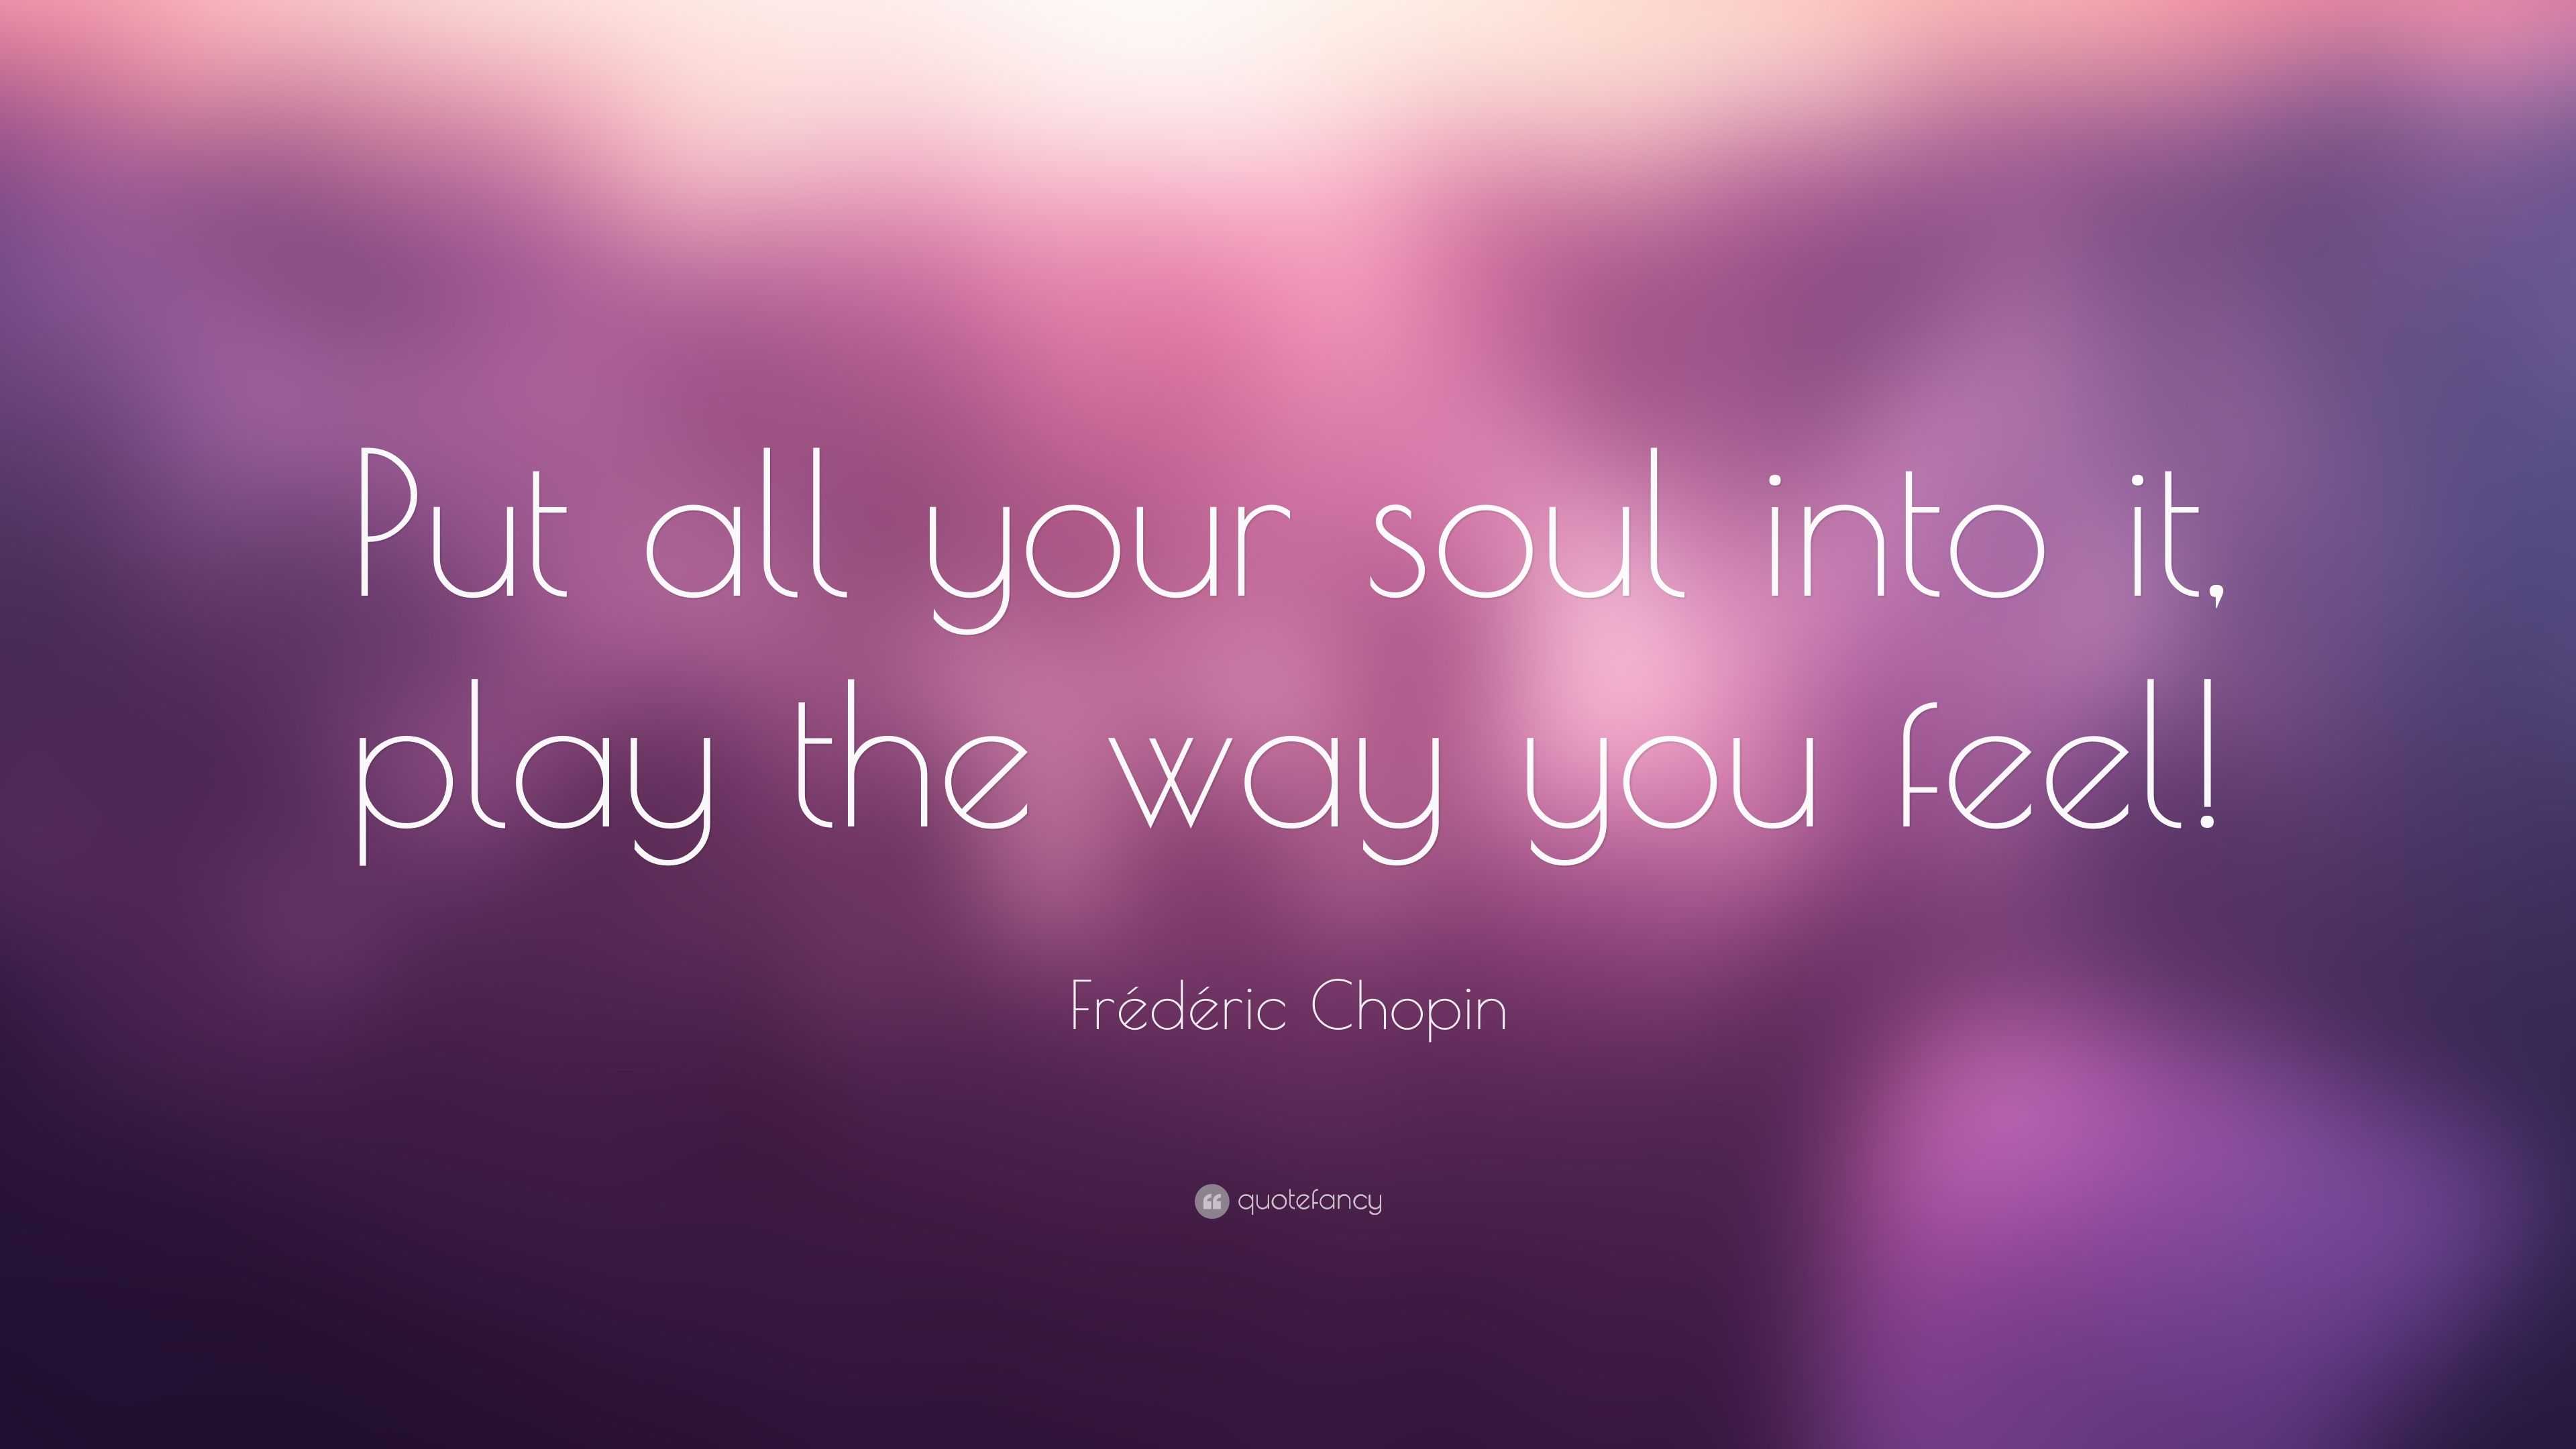 Frédéric Chopin Quote: "Put all your soul into it, play the way you feel!" (12 wallpapers ...